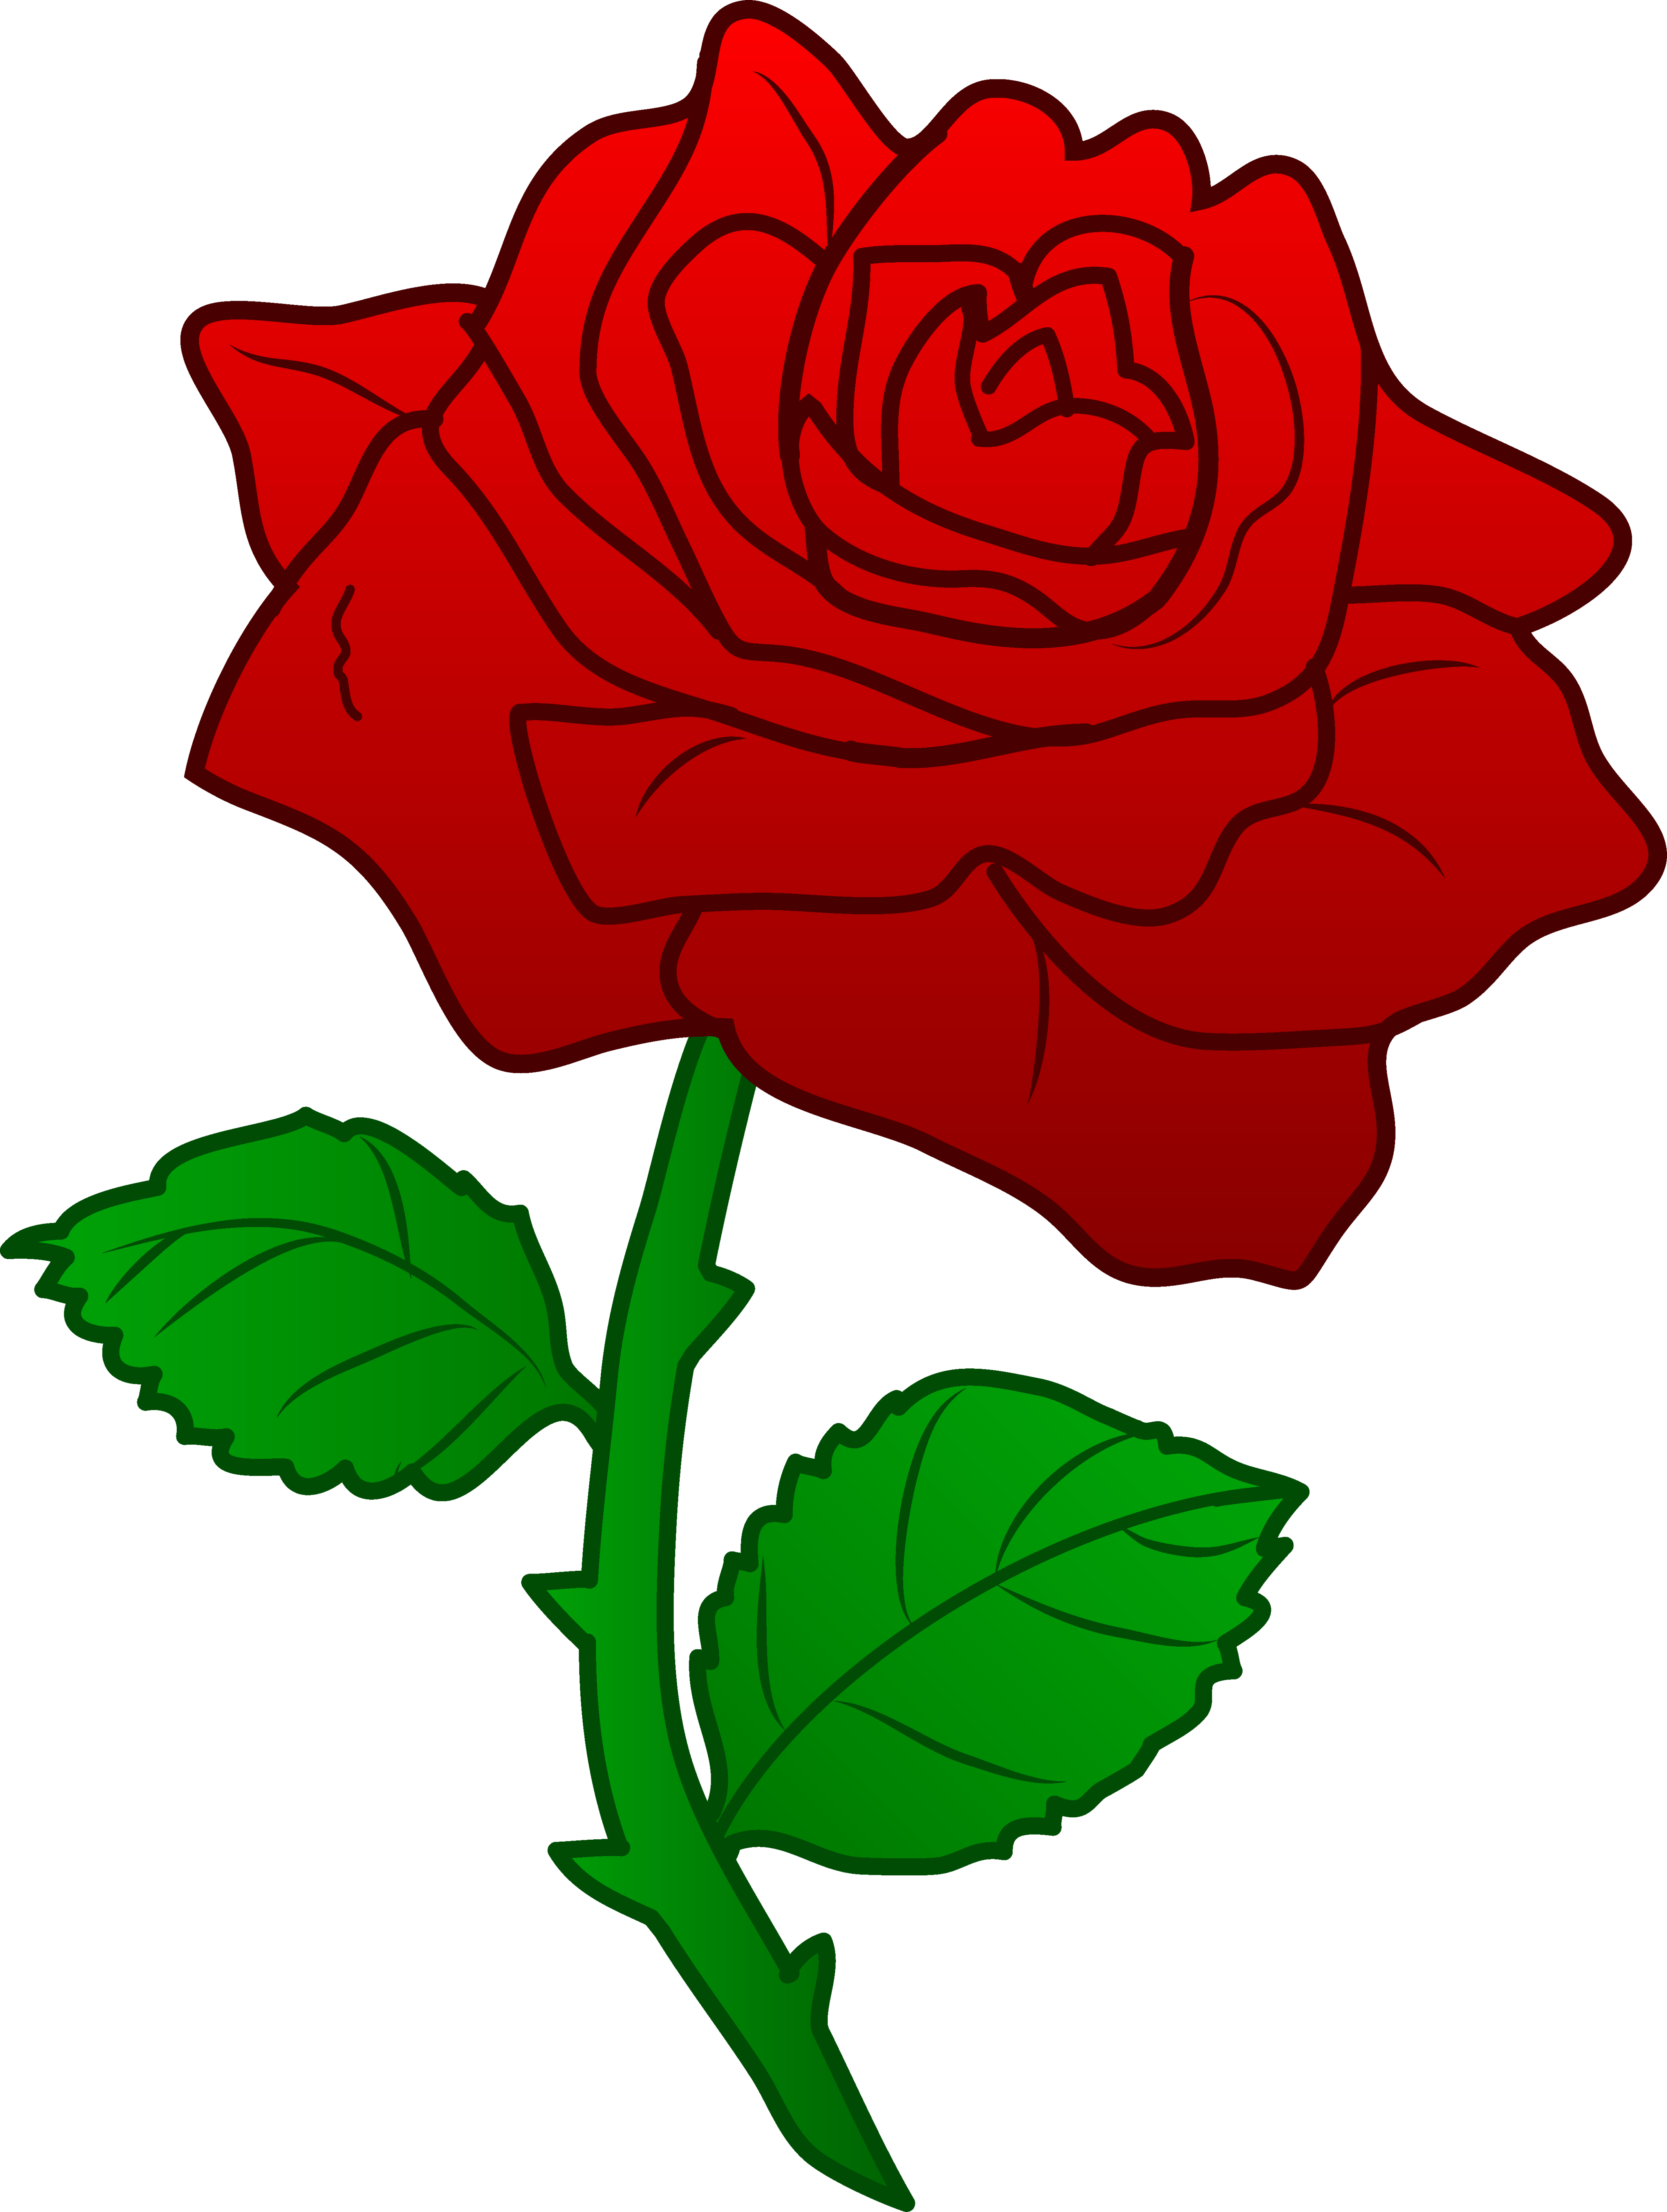 Red Roses Clip Art Images | C